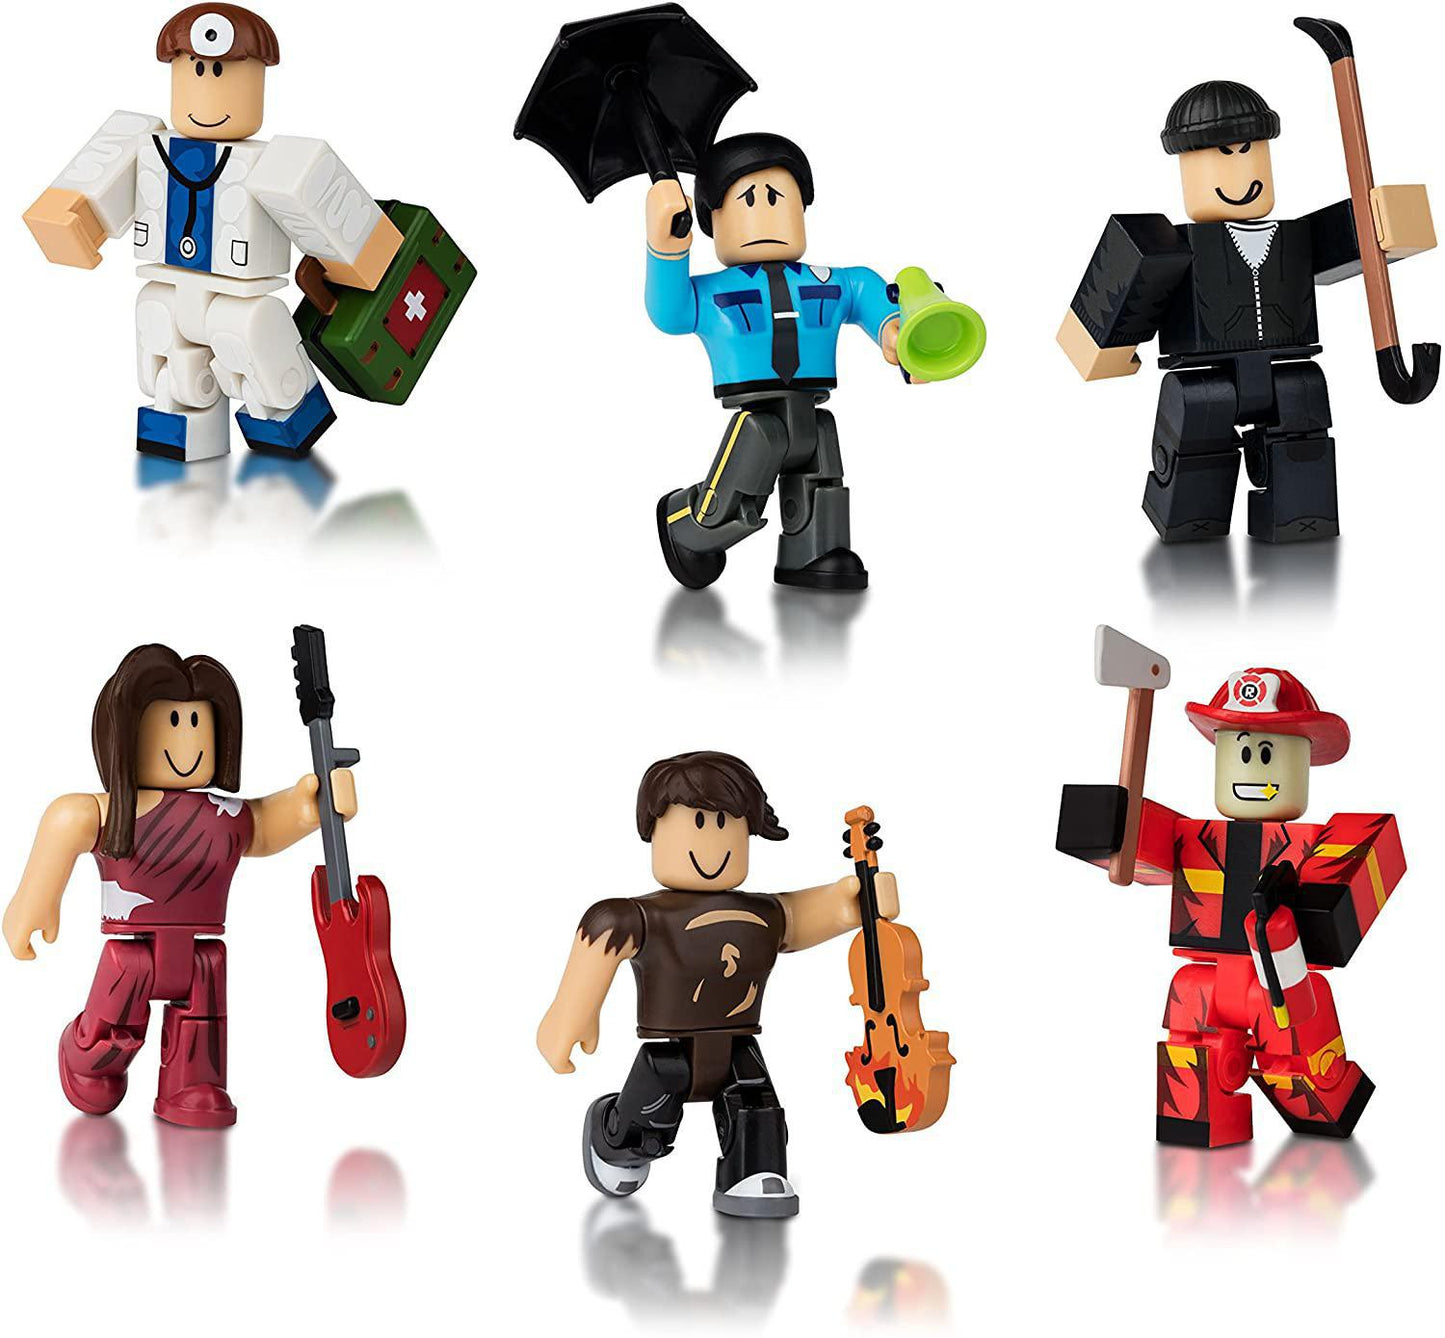 Roblox Action Collection - Citizens of Roblox Six Figure Pack [Includes Exclusive Virtual Item]